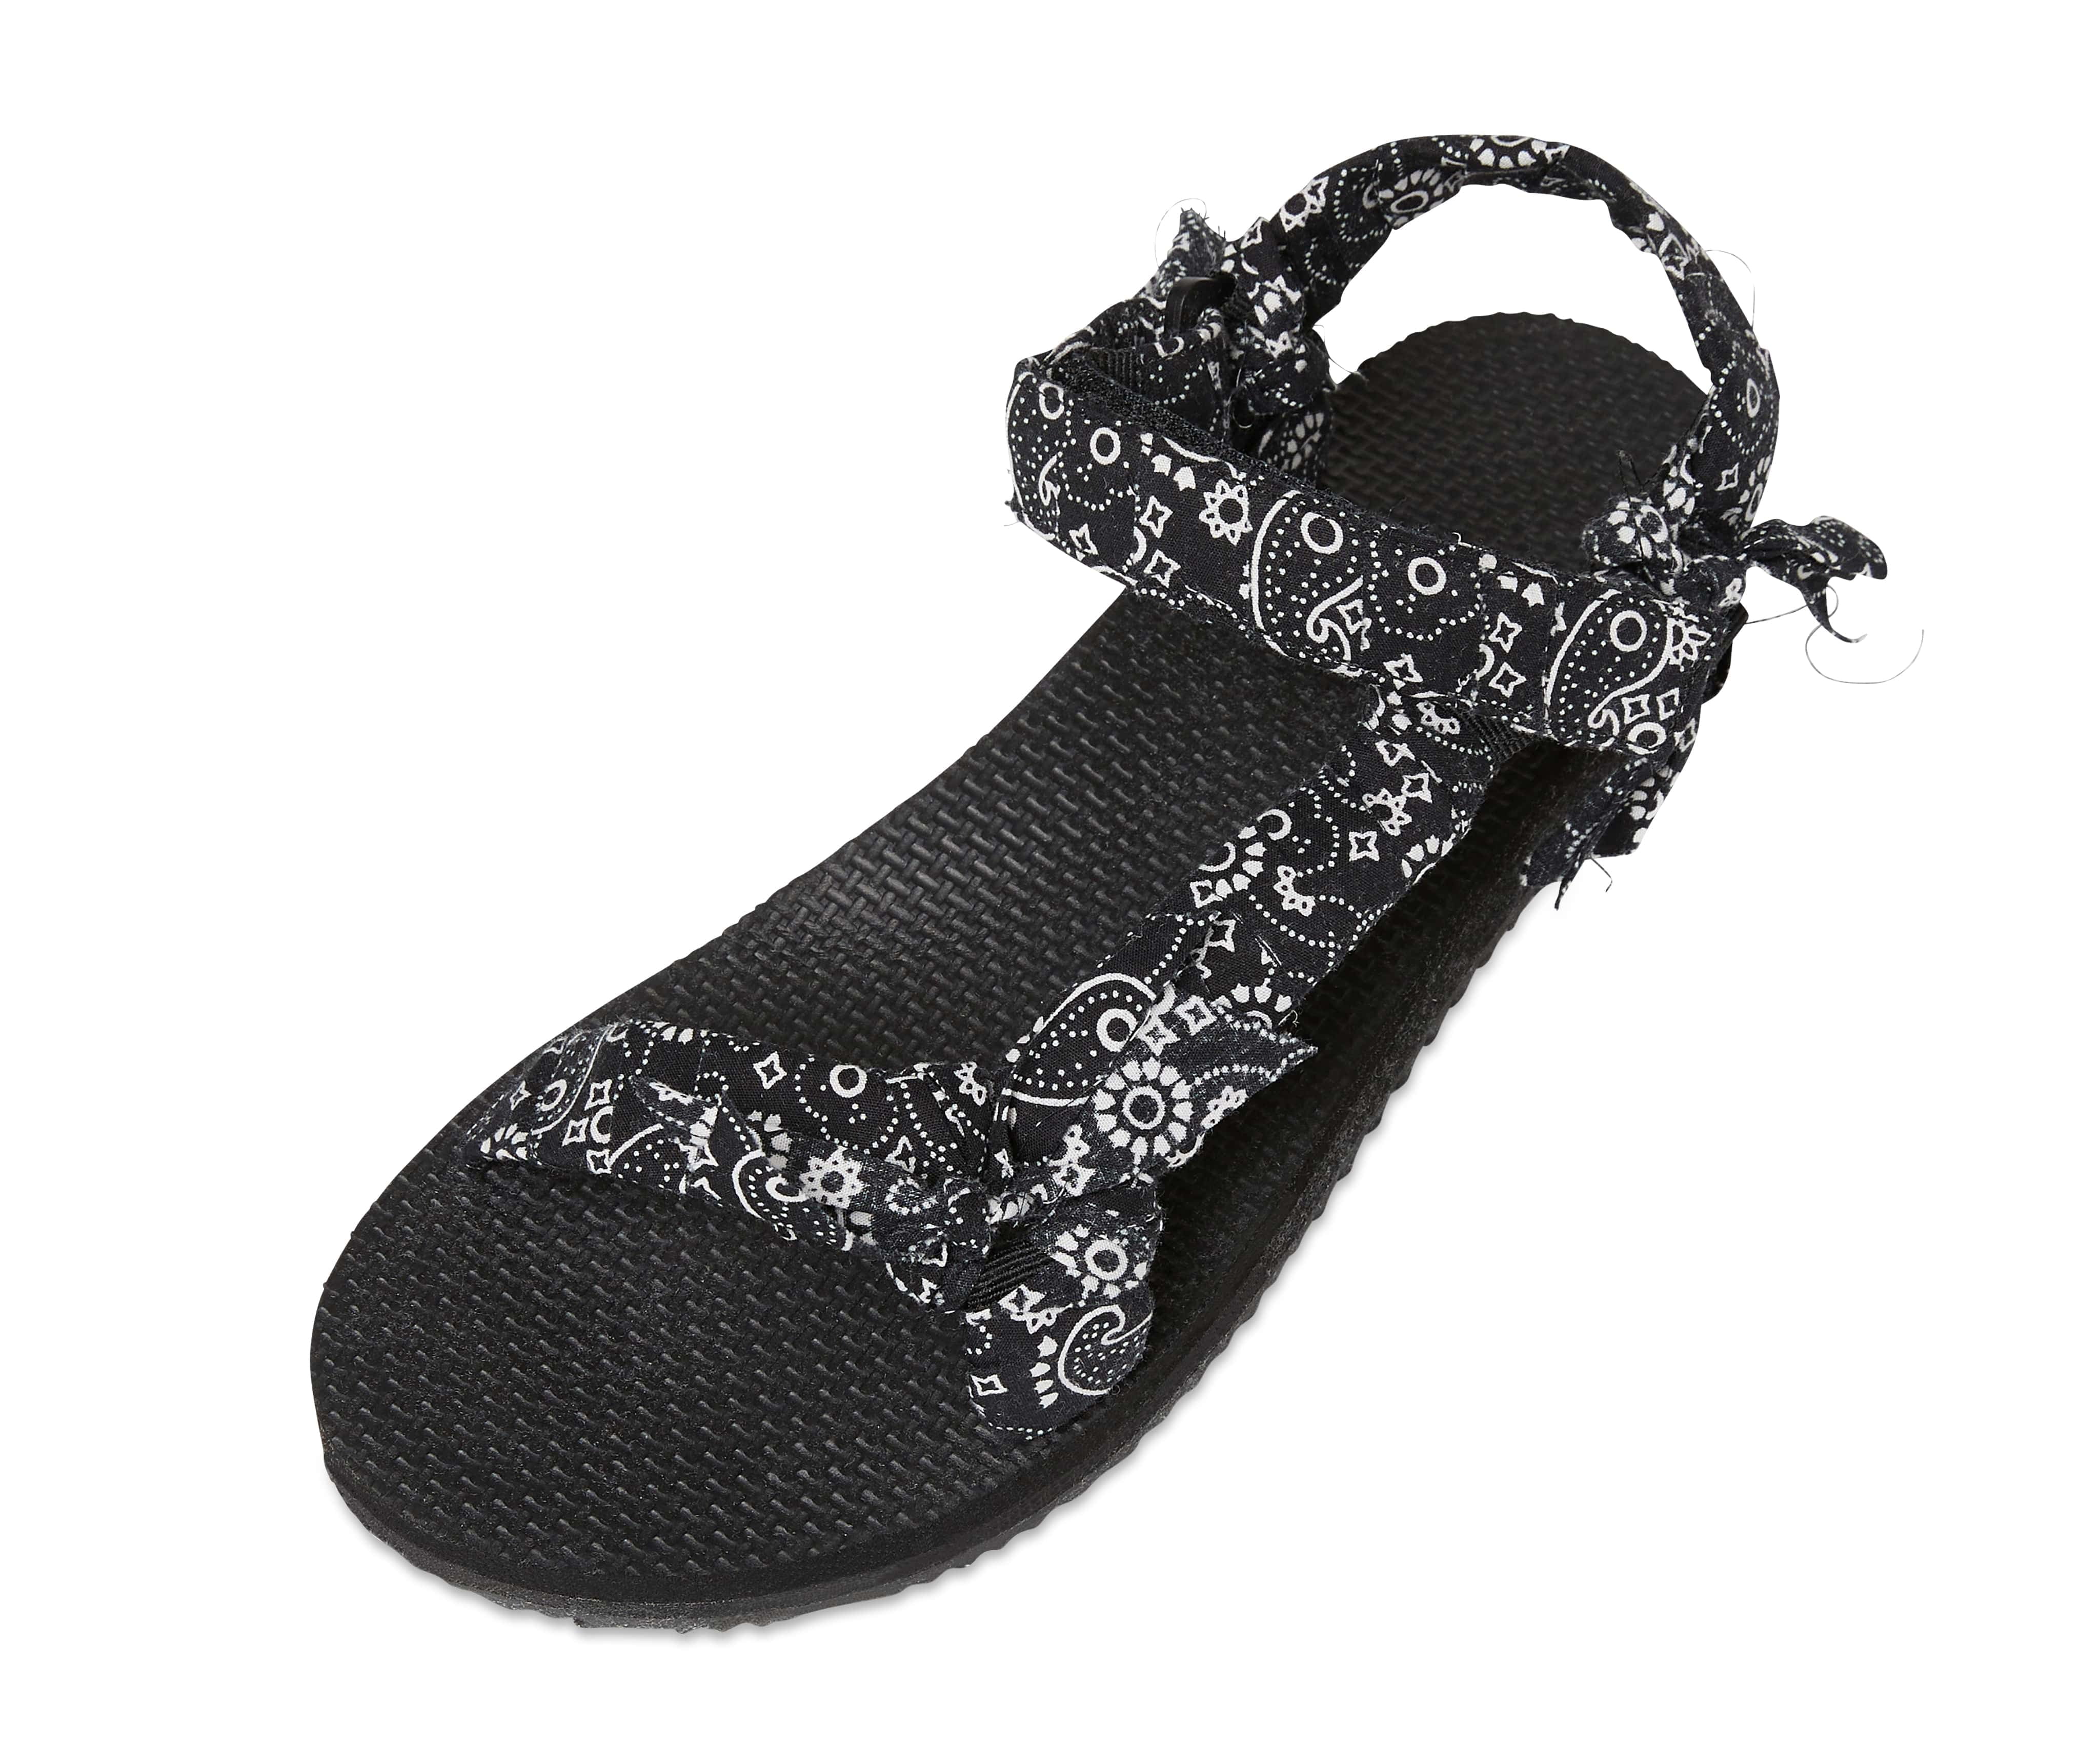 Womens Original Sandals Sport Sandals with Yoga Mat Insole Hiking Sandals Light-Weight Shoes 